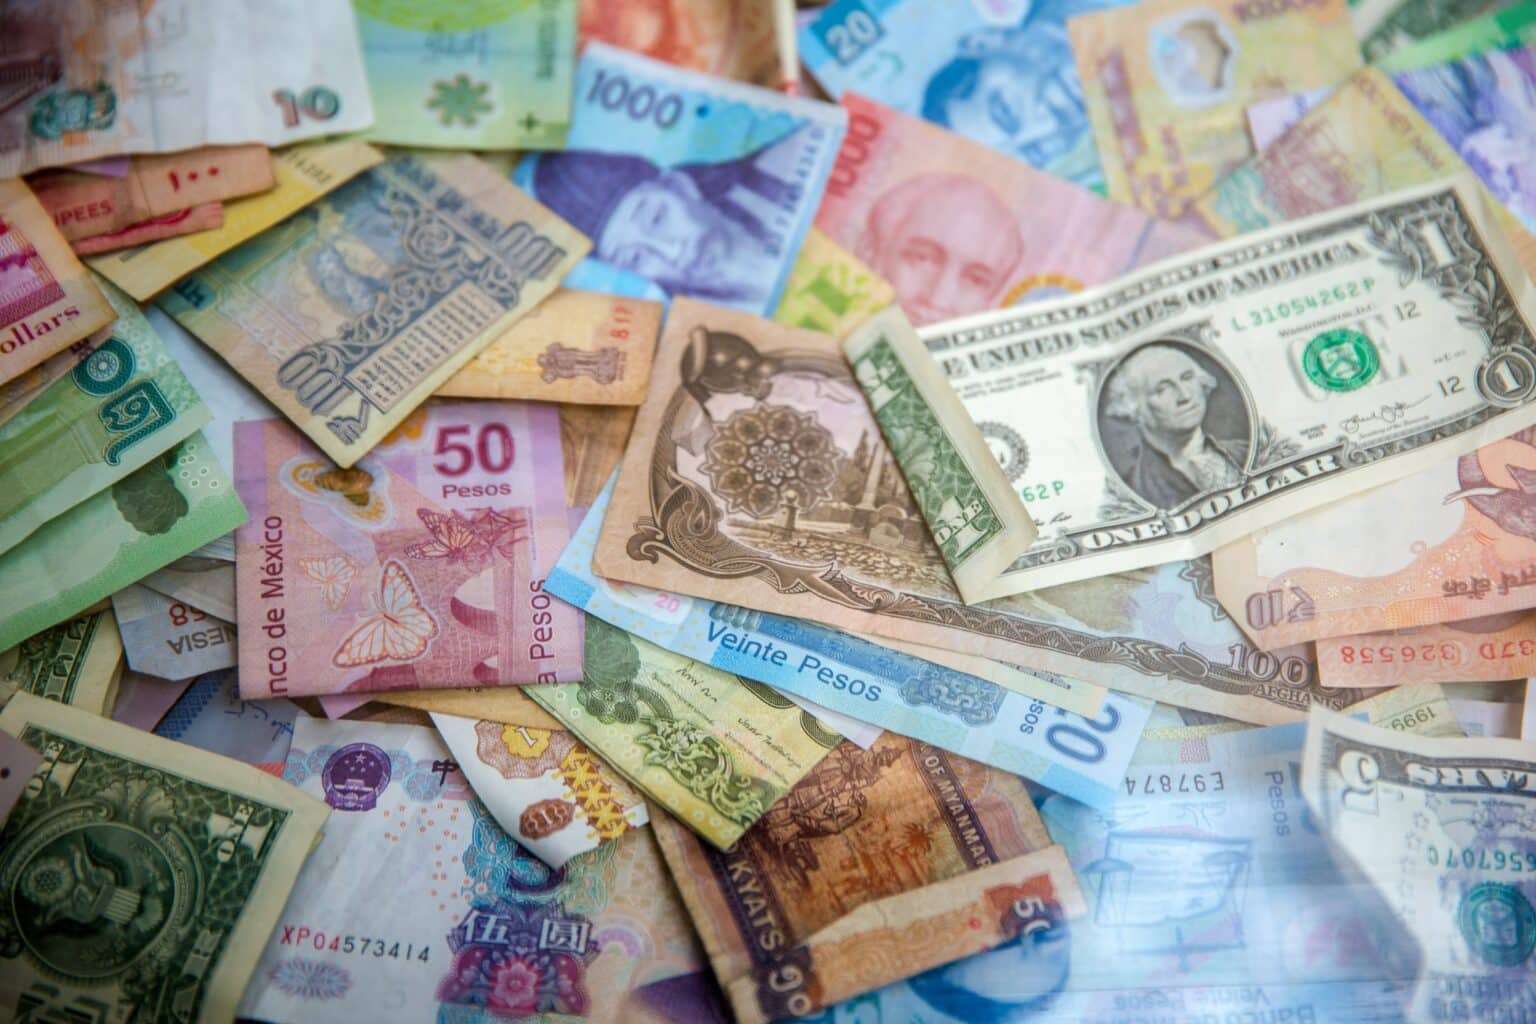 Currency notes from all different countries when manifesting money